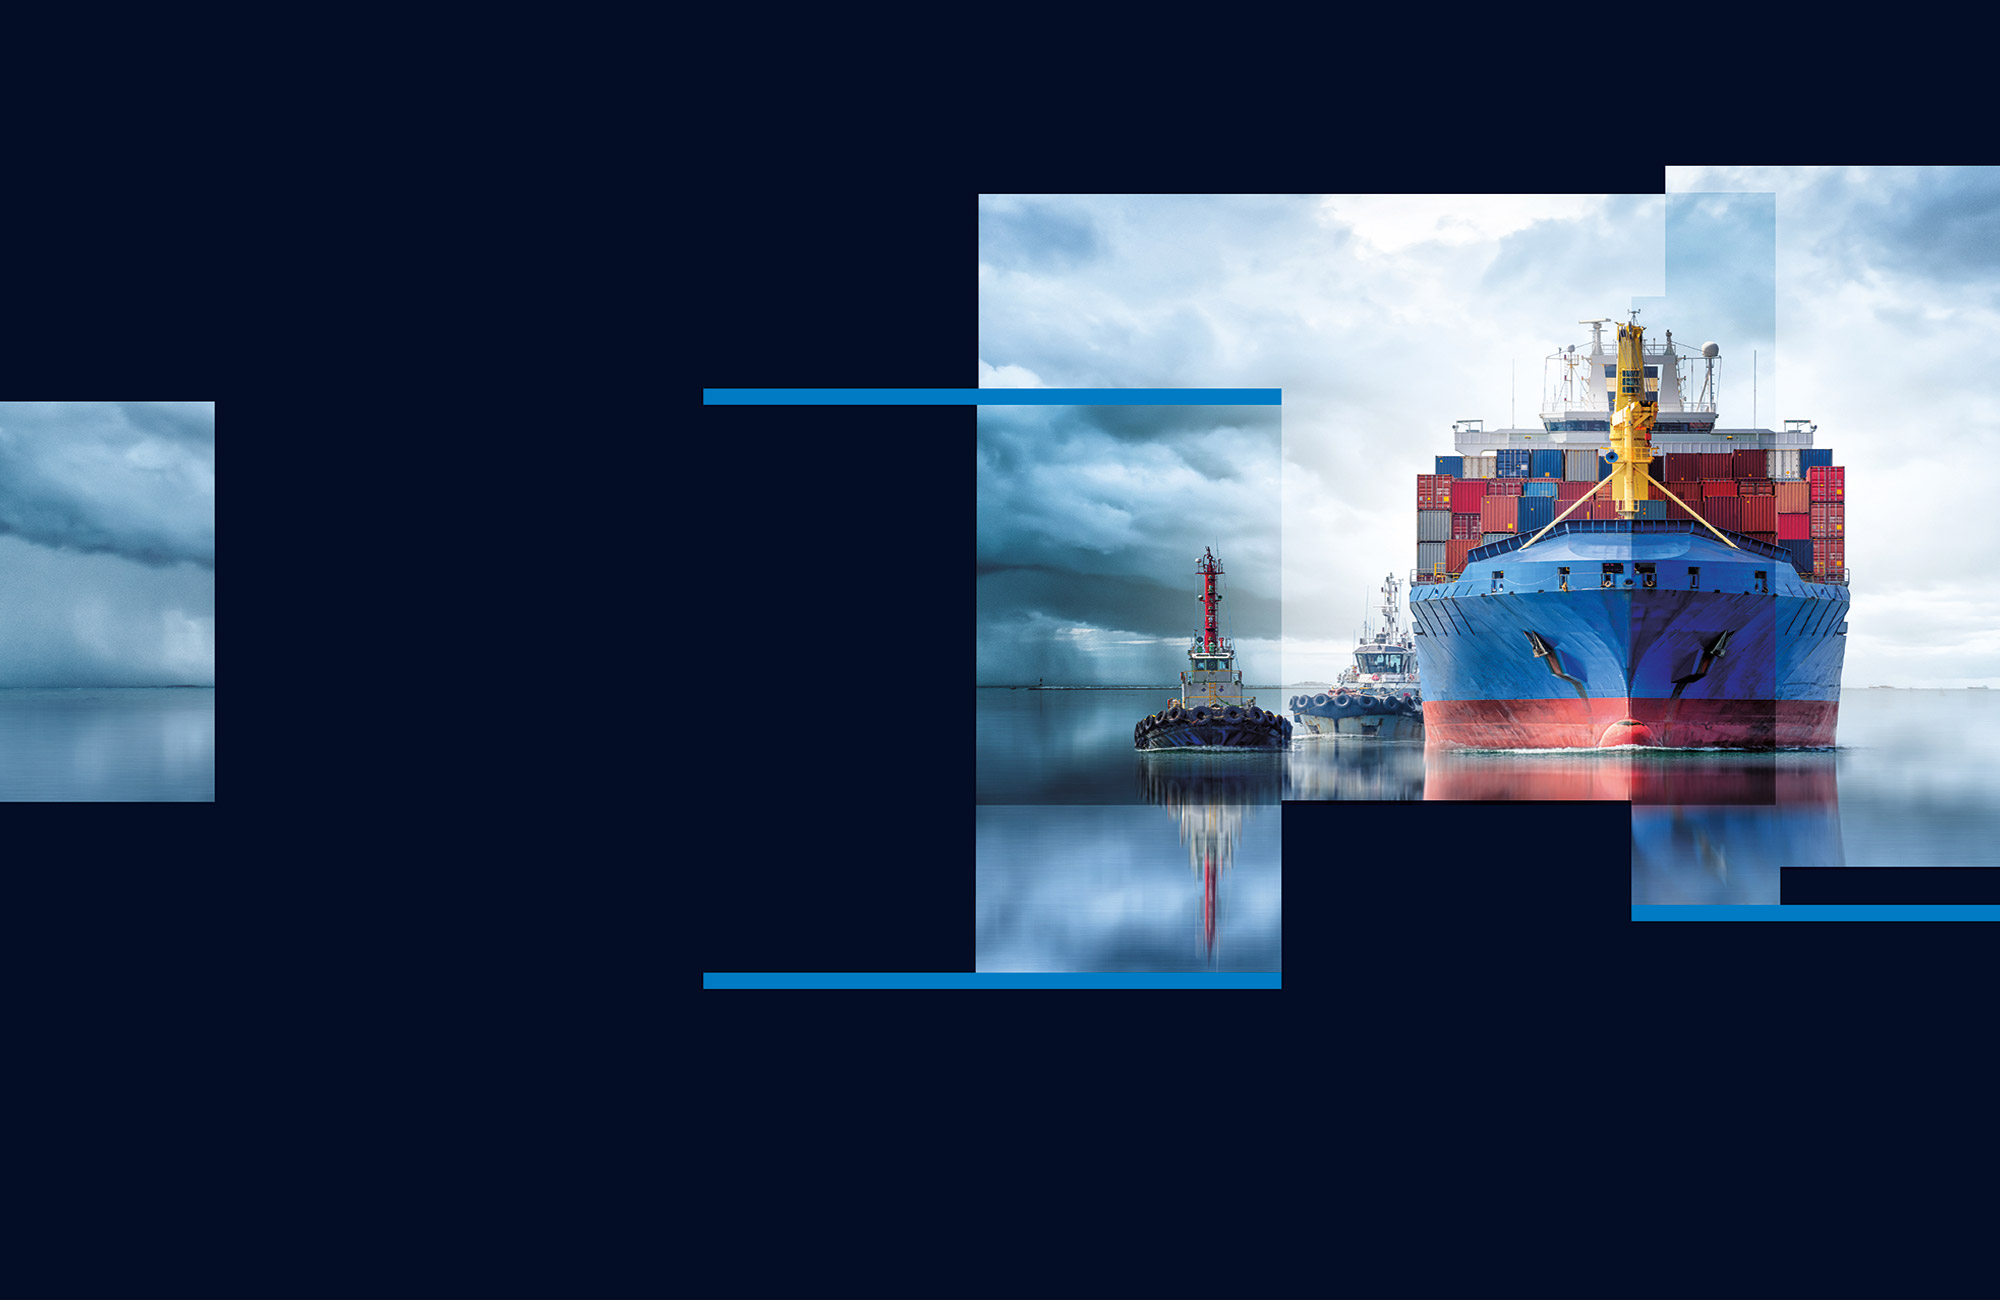 Maritime Trends is not just a conference. Since 2011, it has evolved into an institution for the maritime community, becoming more and more relevant as new challenges and shifts constantly occur